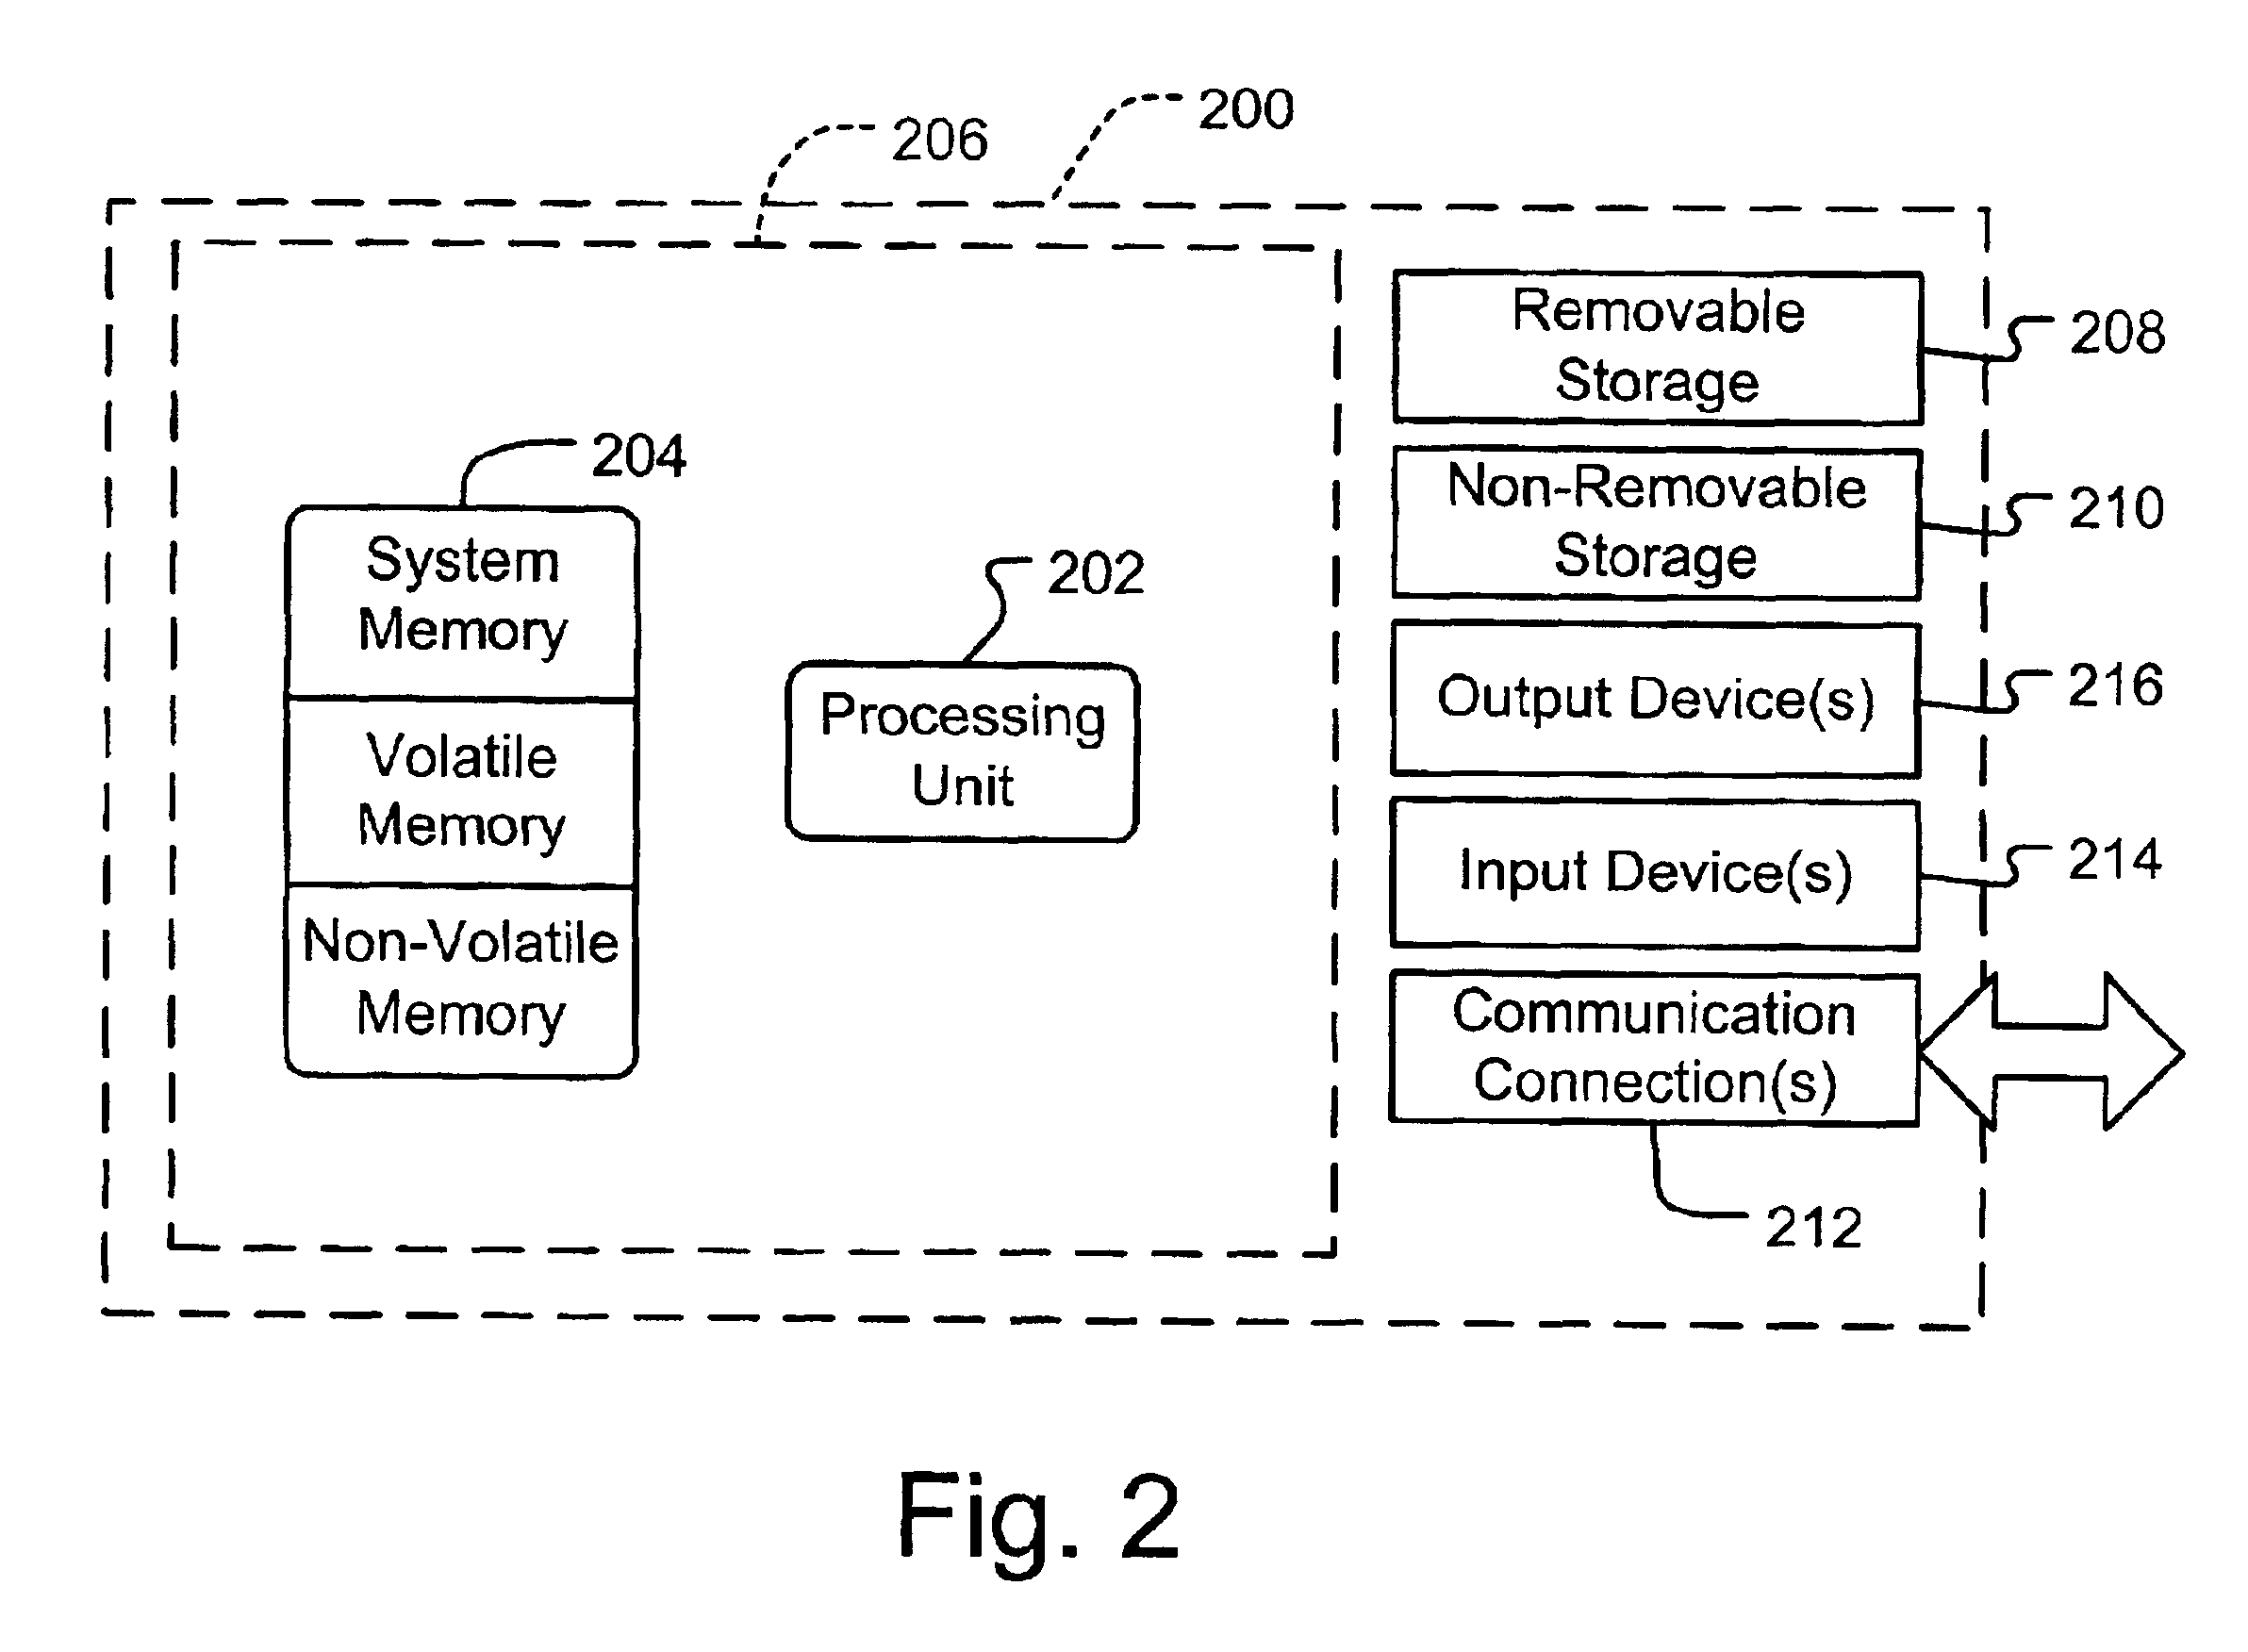 Navigation tool for accessing workspaces and modules in a graphical user interface